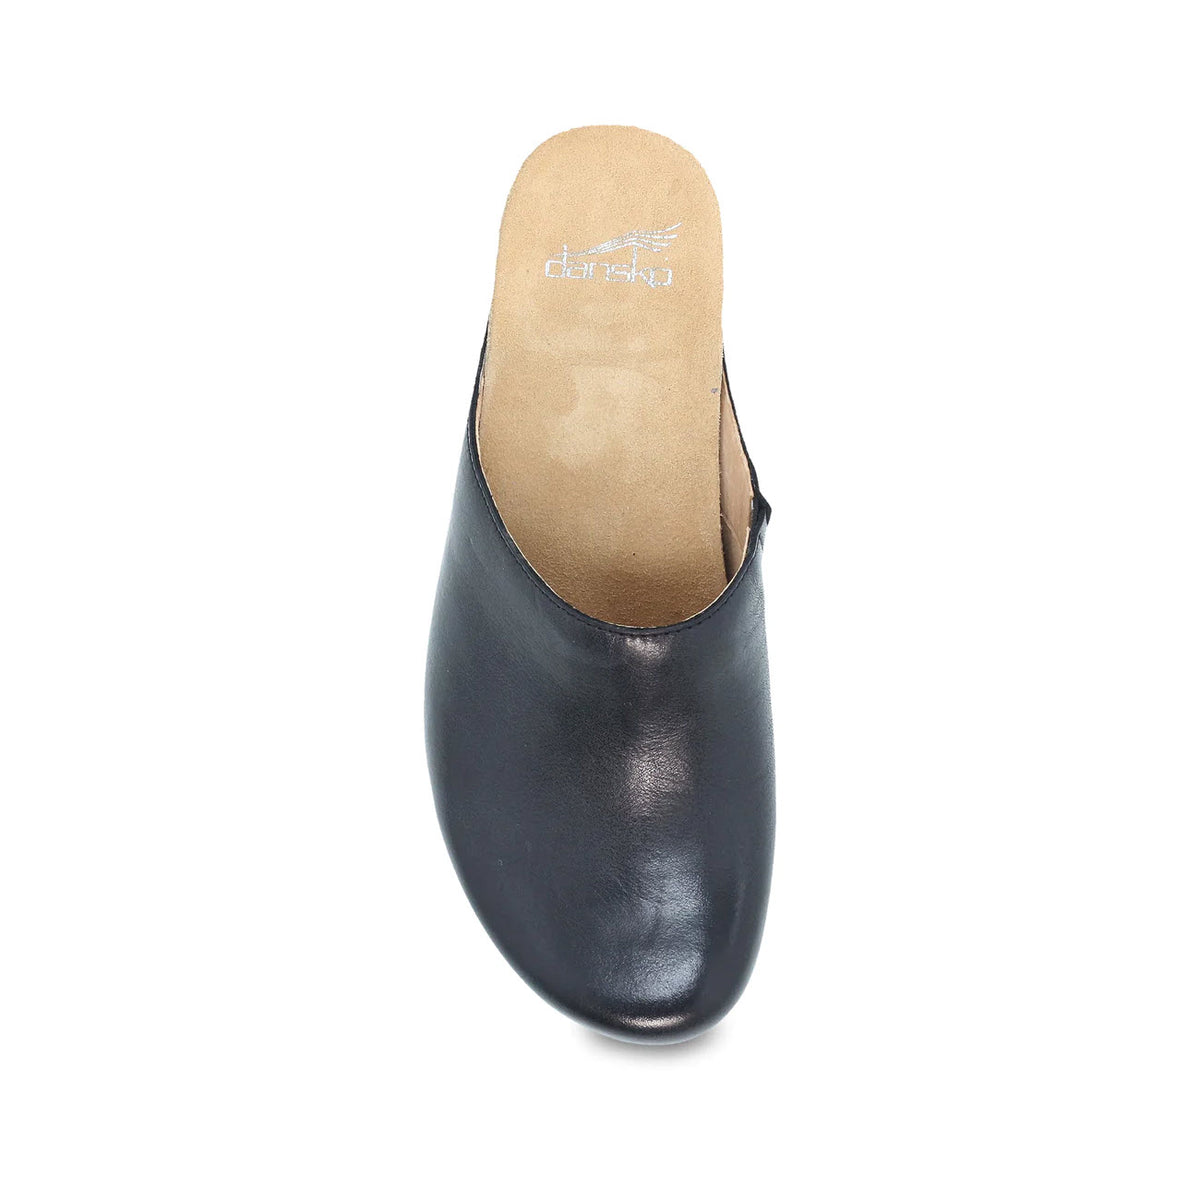 Top view of a single Dansko Talulah Black - Womens leather mule shoe with a contoured footbed and brown insole, isolated on a white background.